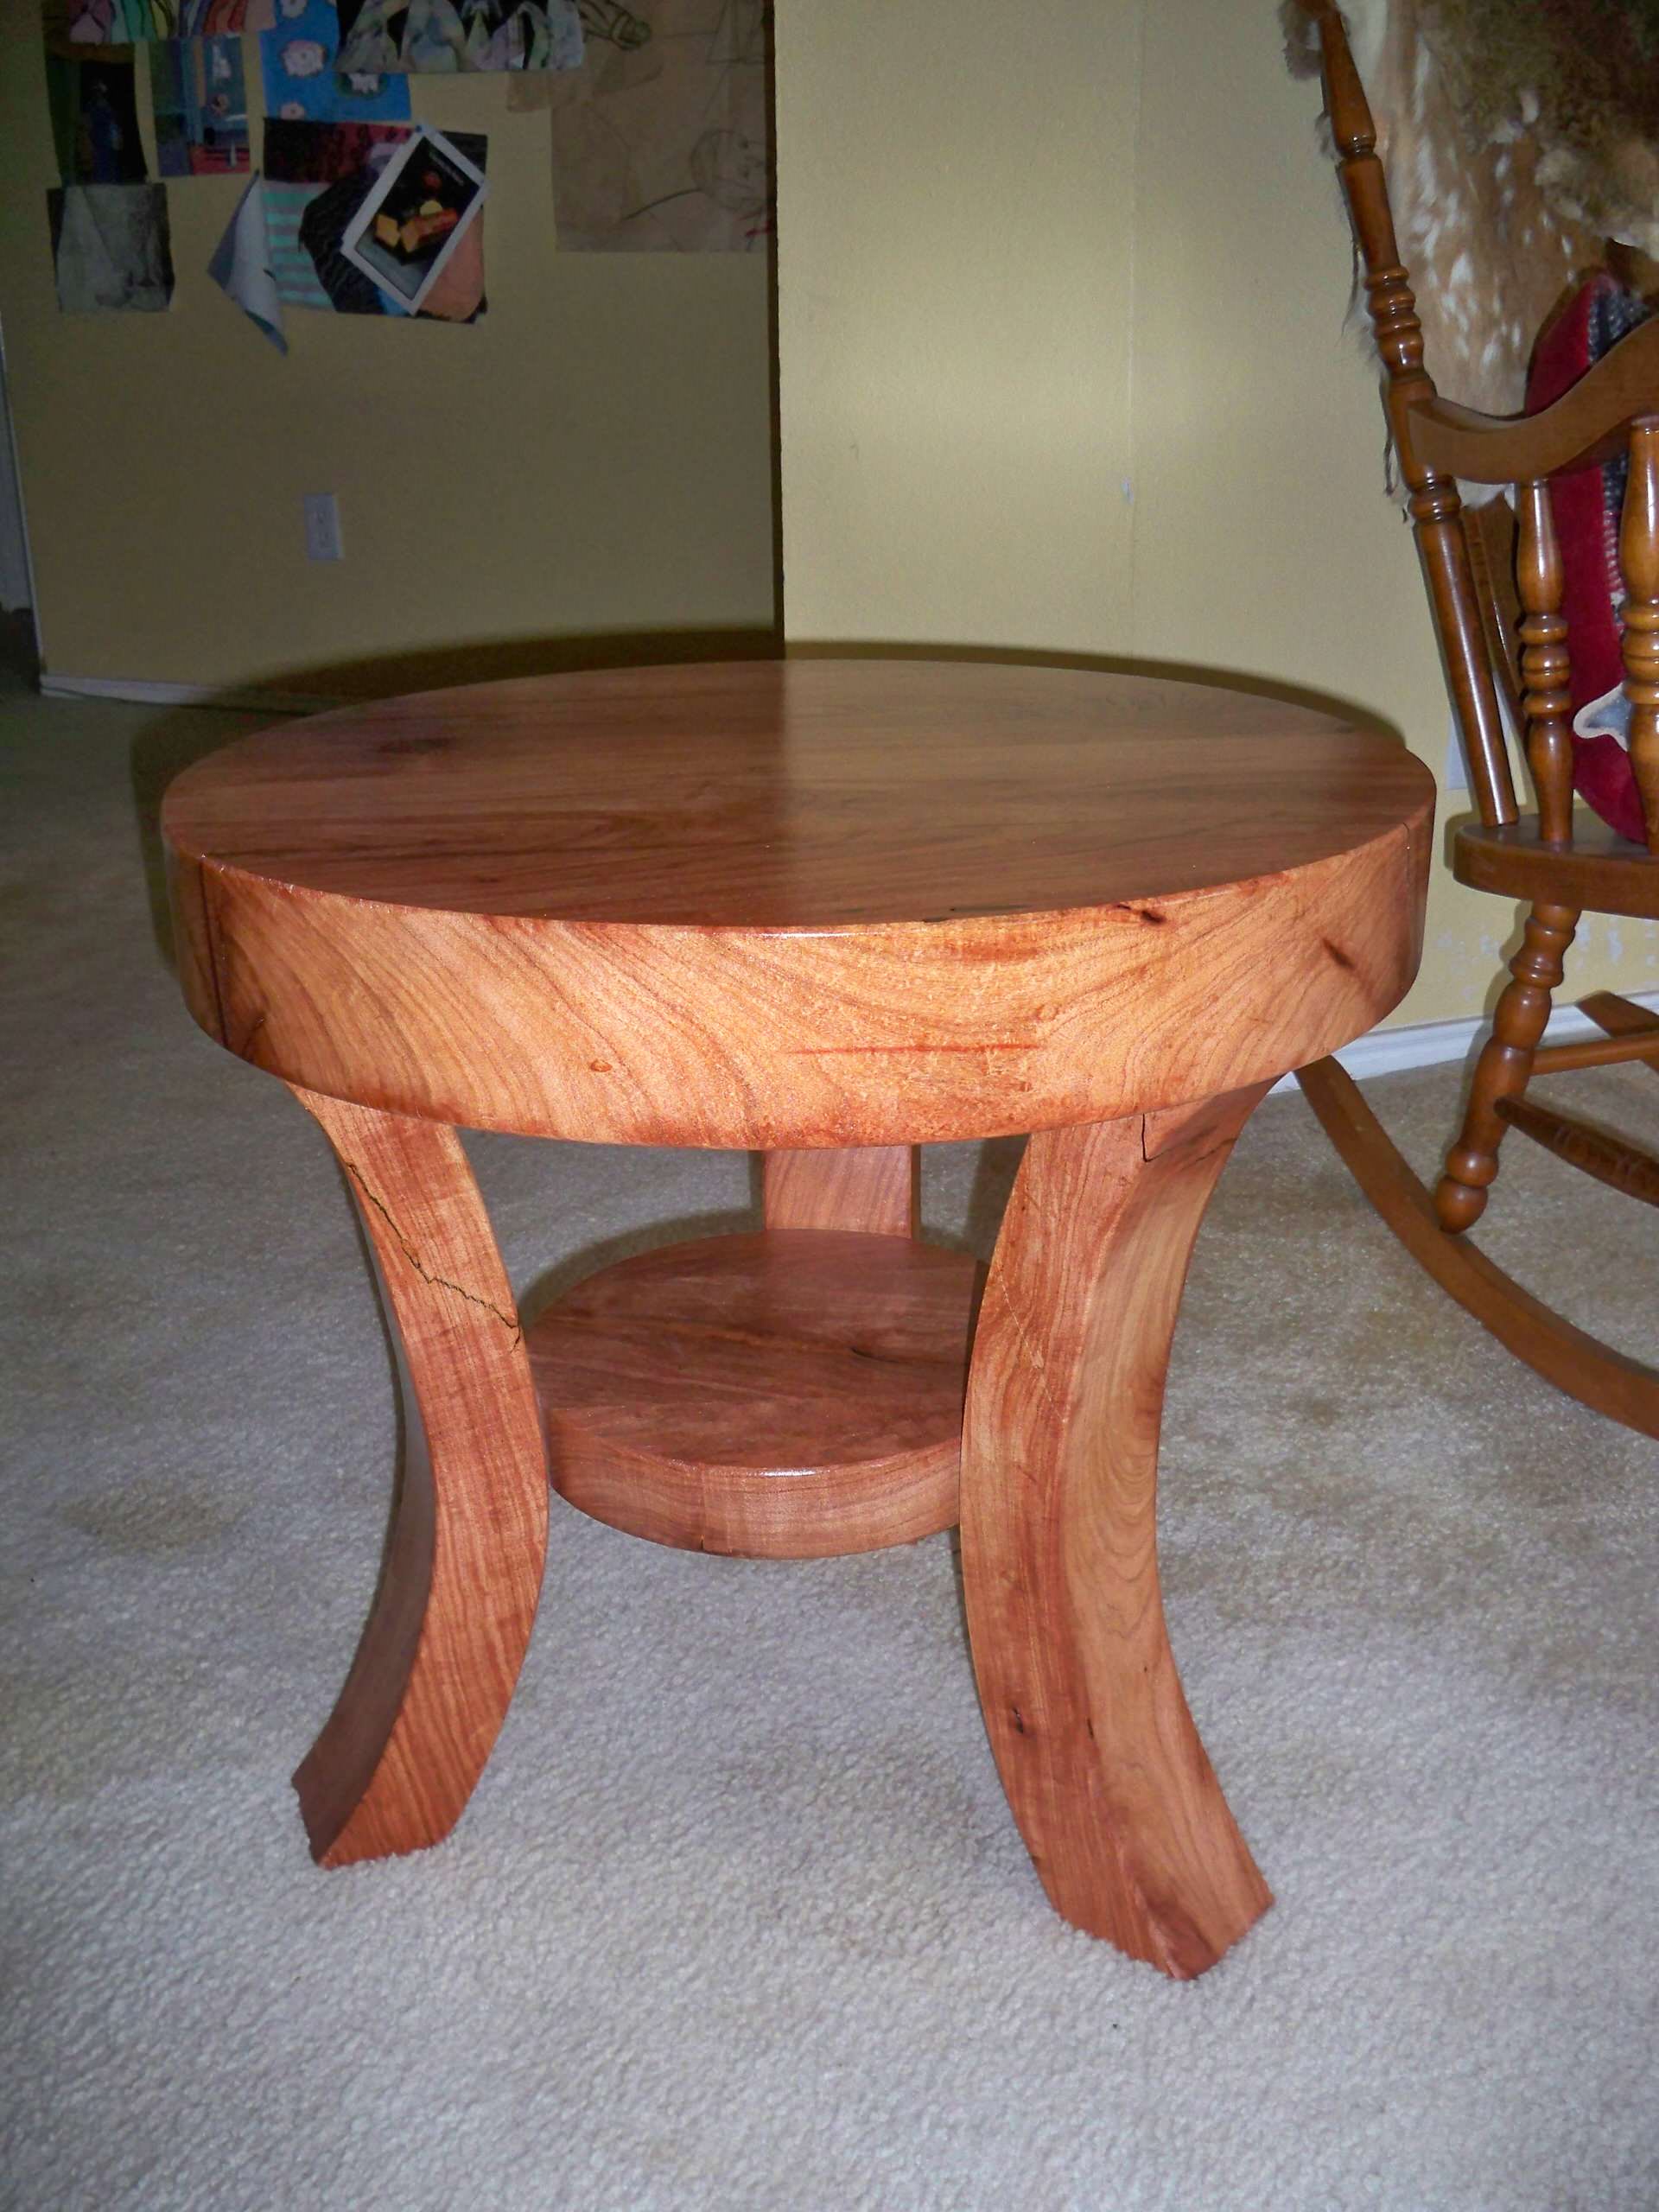 Mesquite side table